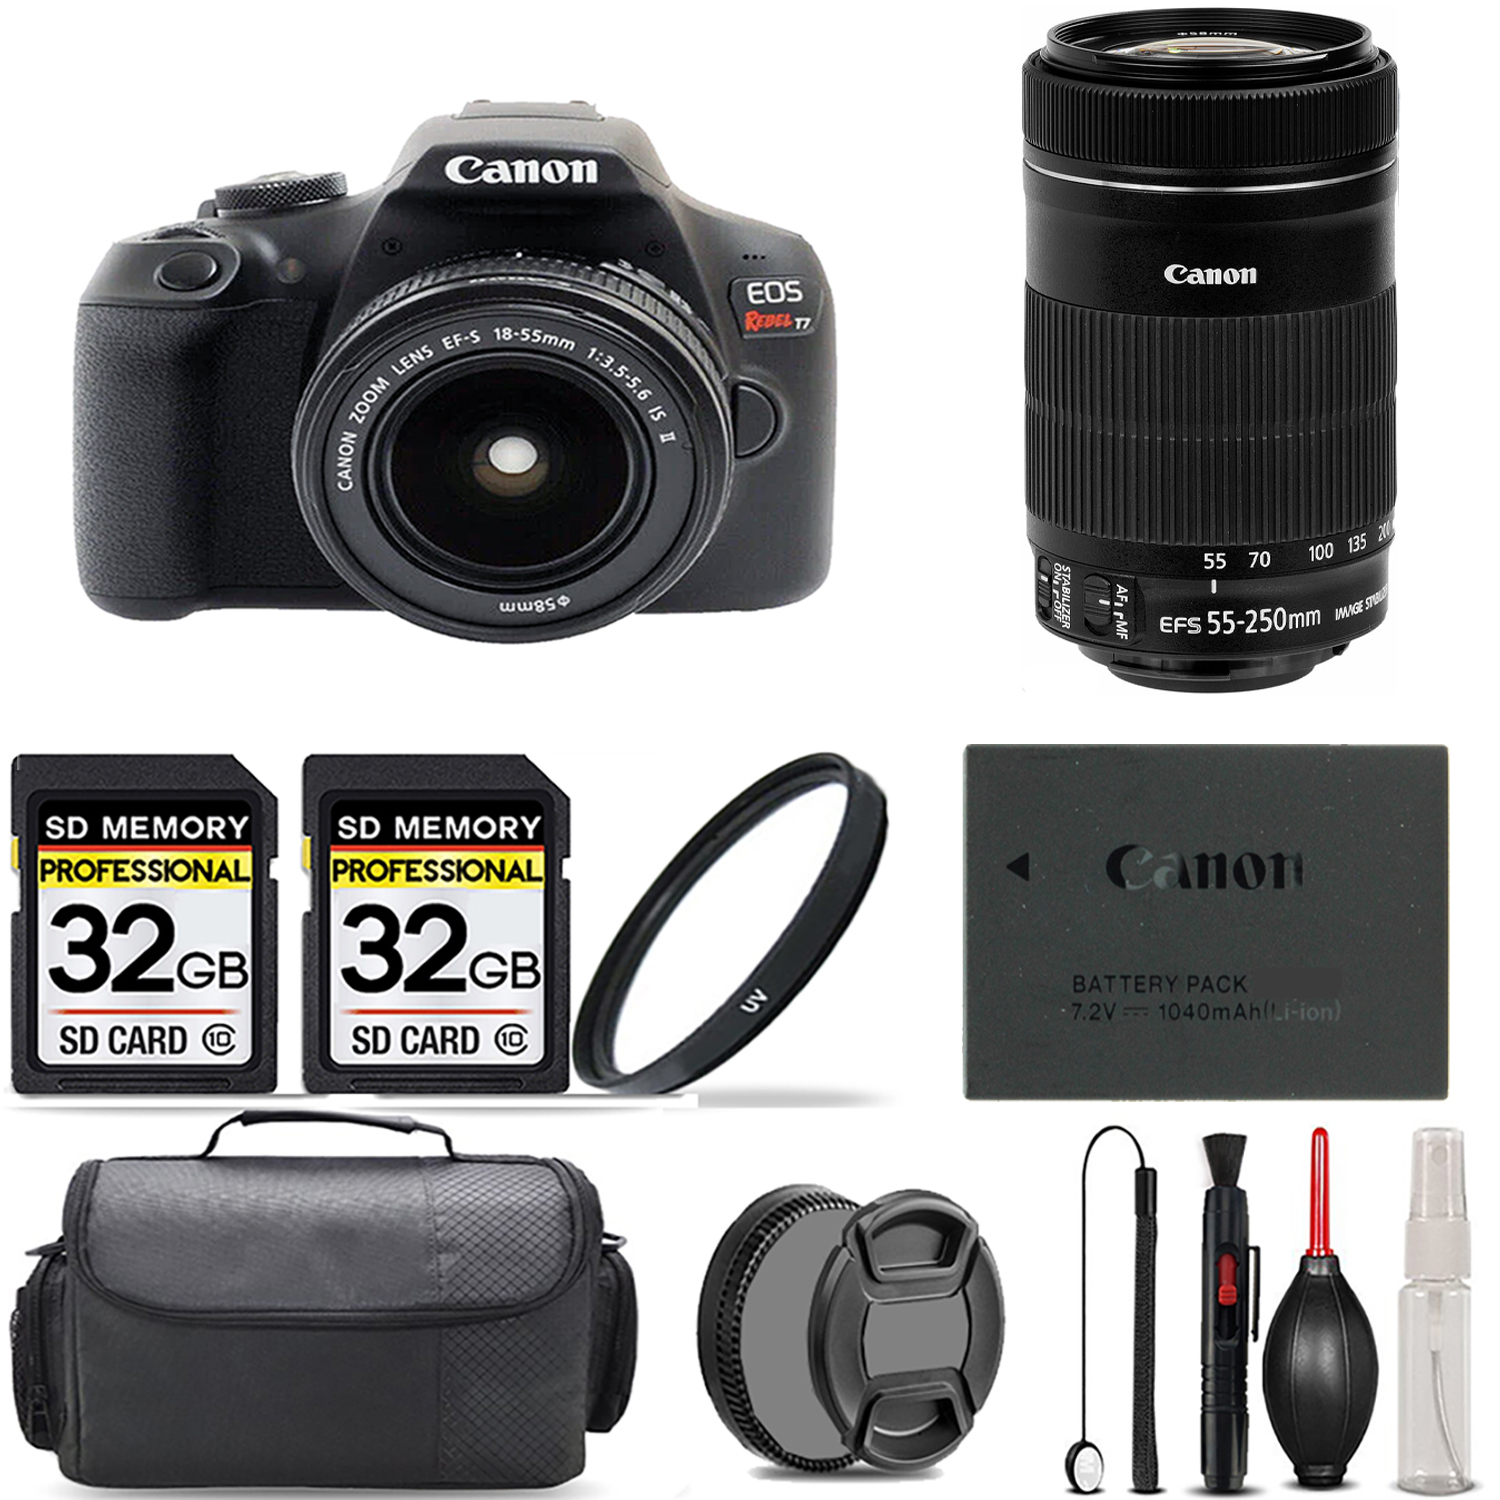 Rebel T7 with 18-55mm Lens + 55-250mm IS STM Lens + UV Filter + 64GB + Bag *FREE SHIPPING*